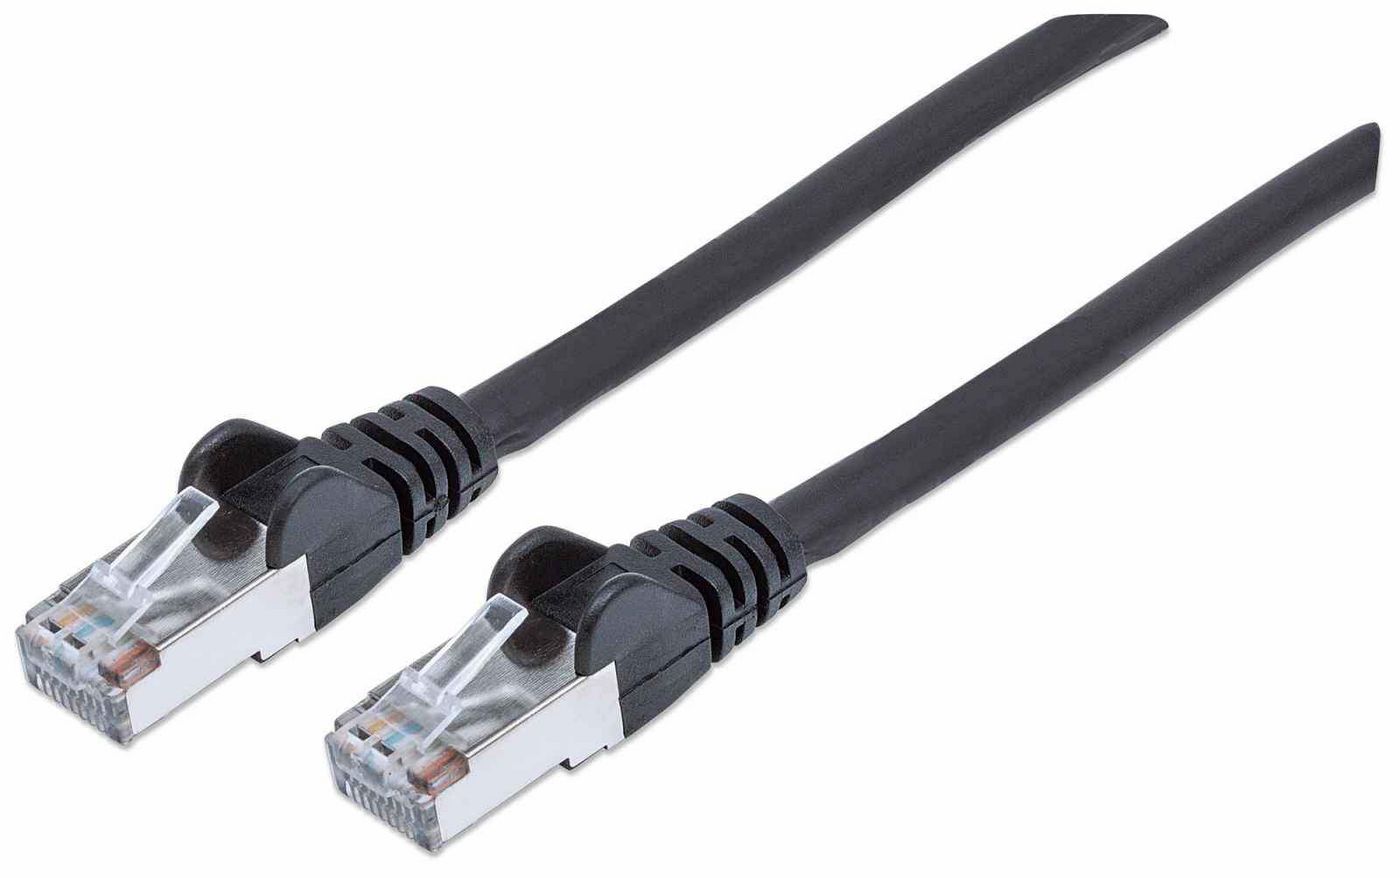 Intellinet 740753 High Performance Network Cable 